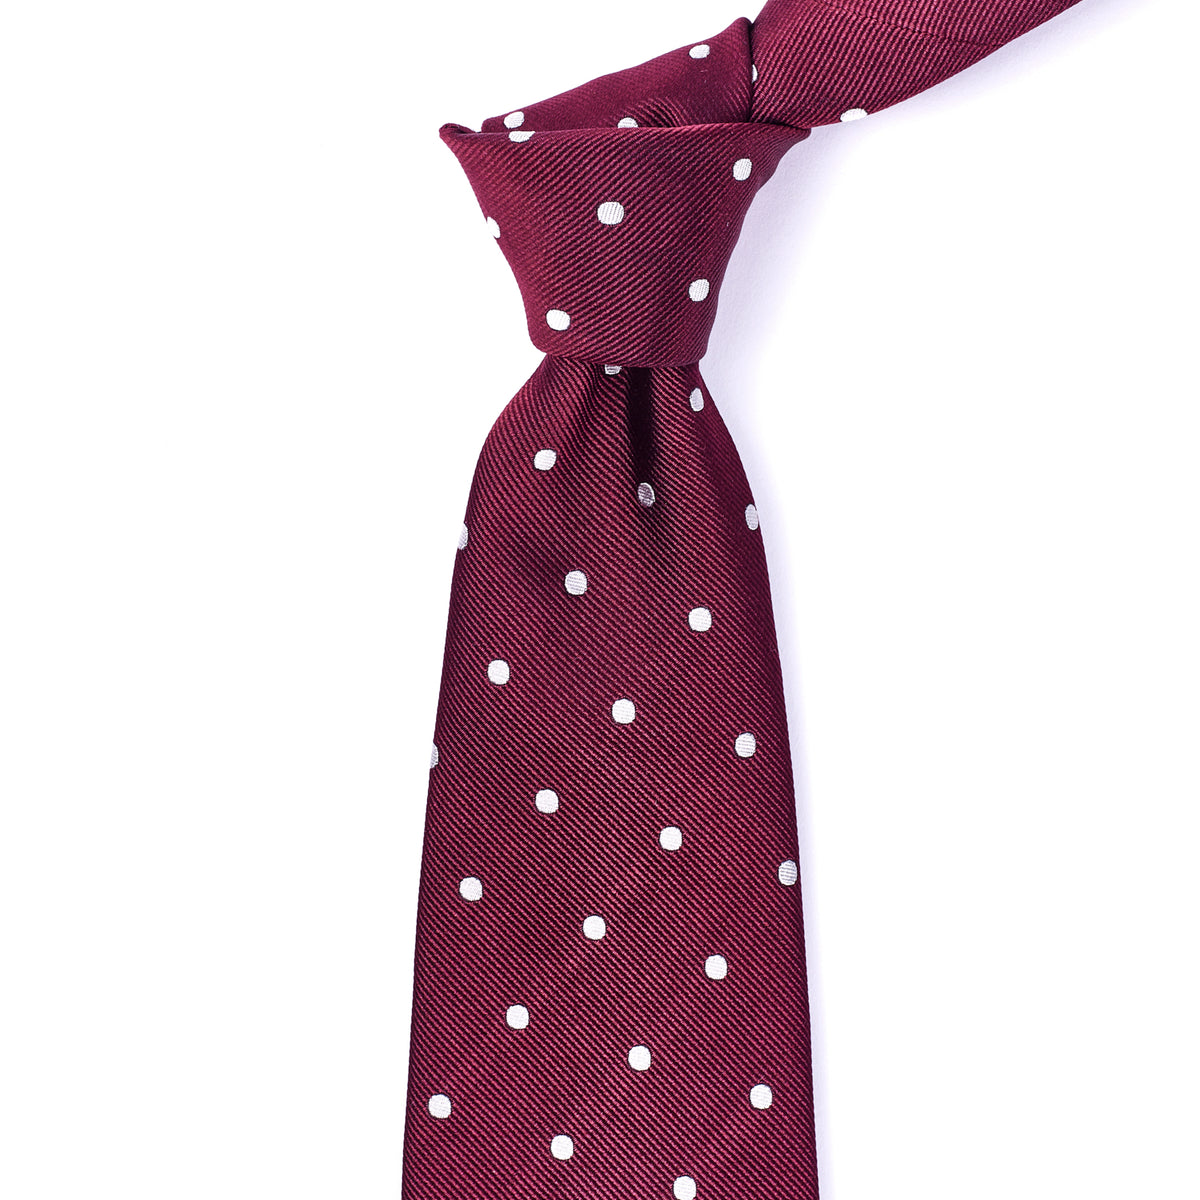 A Sovereign Grade Woven Oxblood Wide Dot tie with quality craftsmanship from KirbyAllison.com.